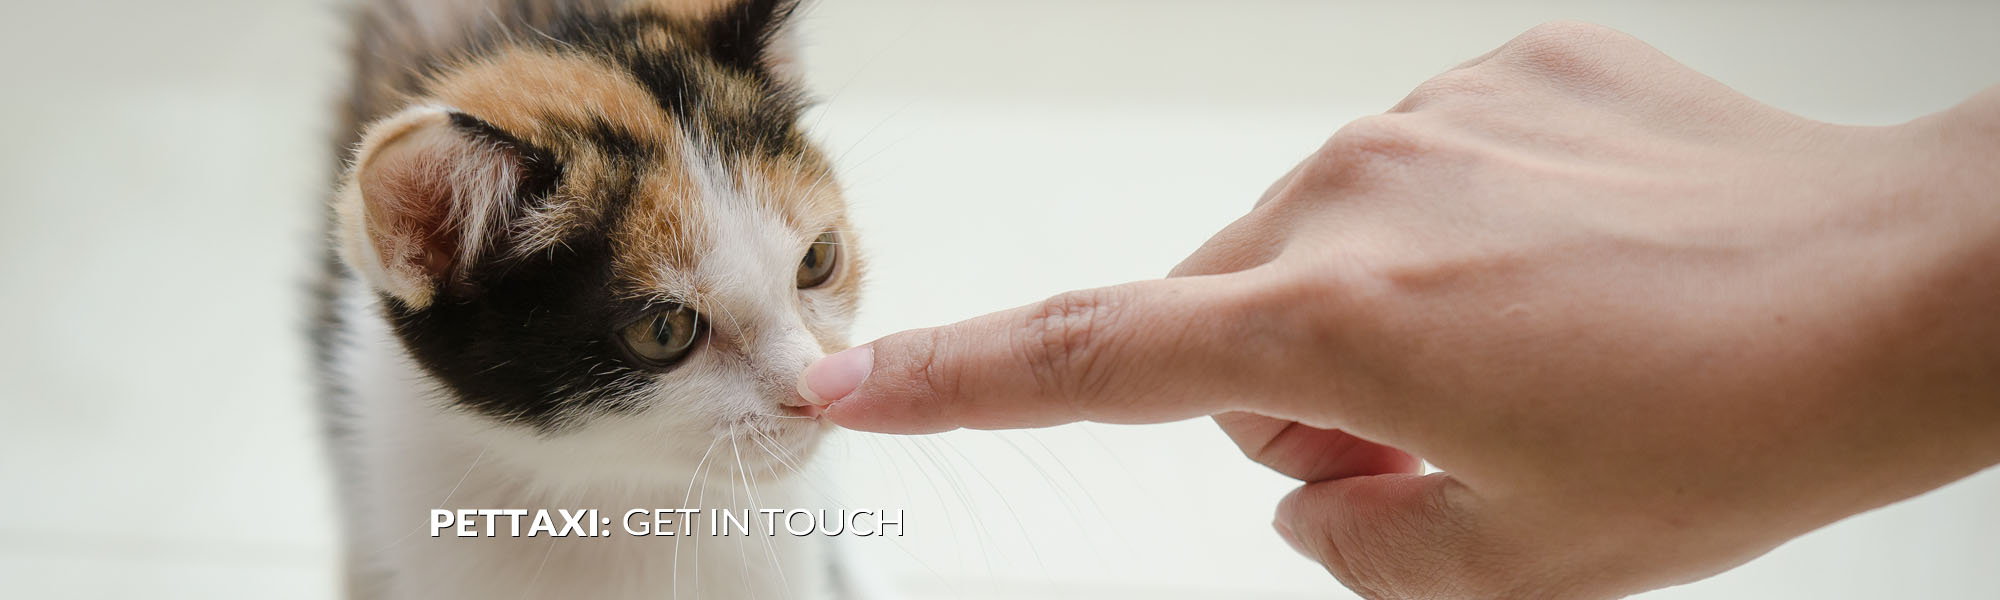 pet-taxi-get-in-touch-header